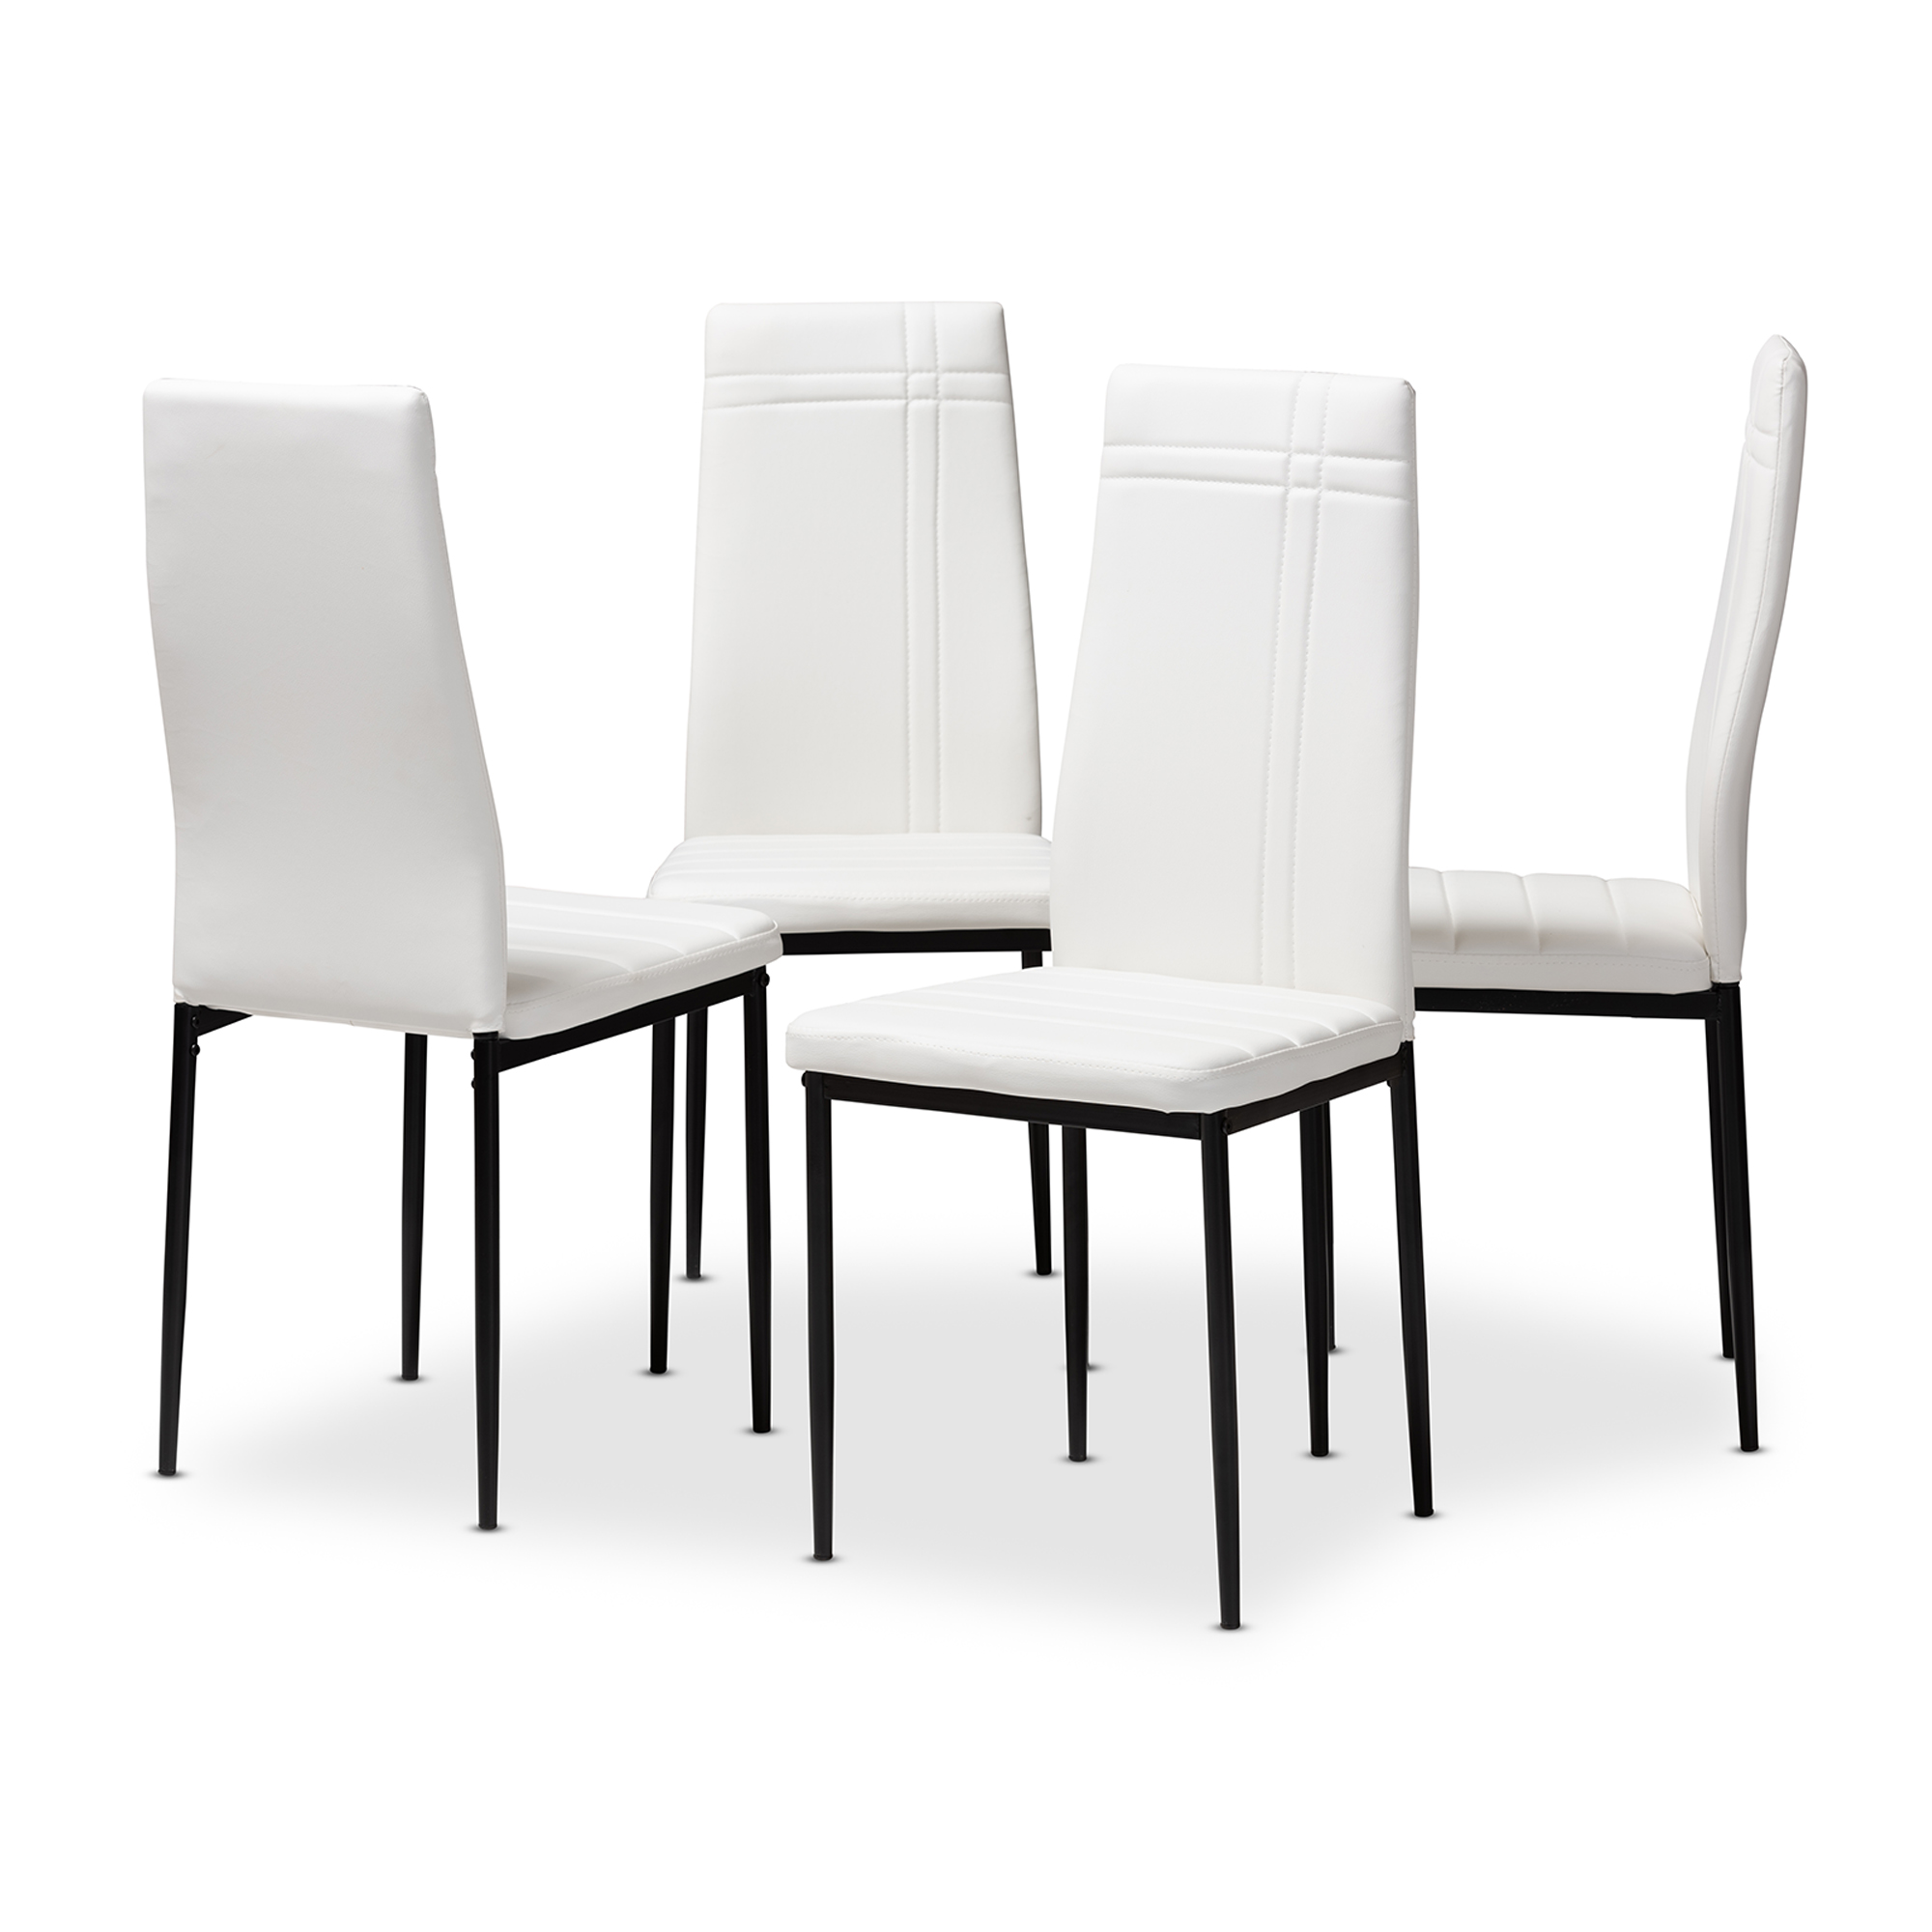 Baxton Studio Matiese Modern and Contemporary White Faux Leather Upholstered Dining Chair (Set of 4)